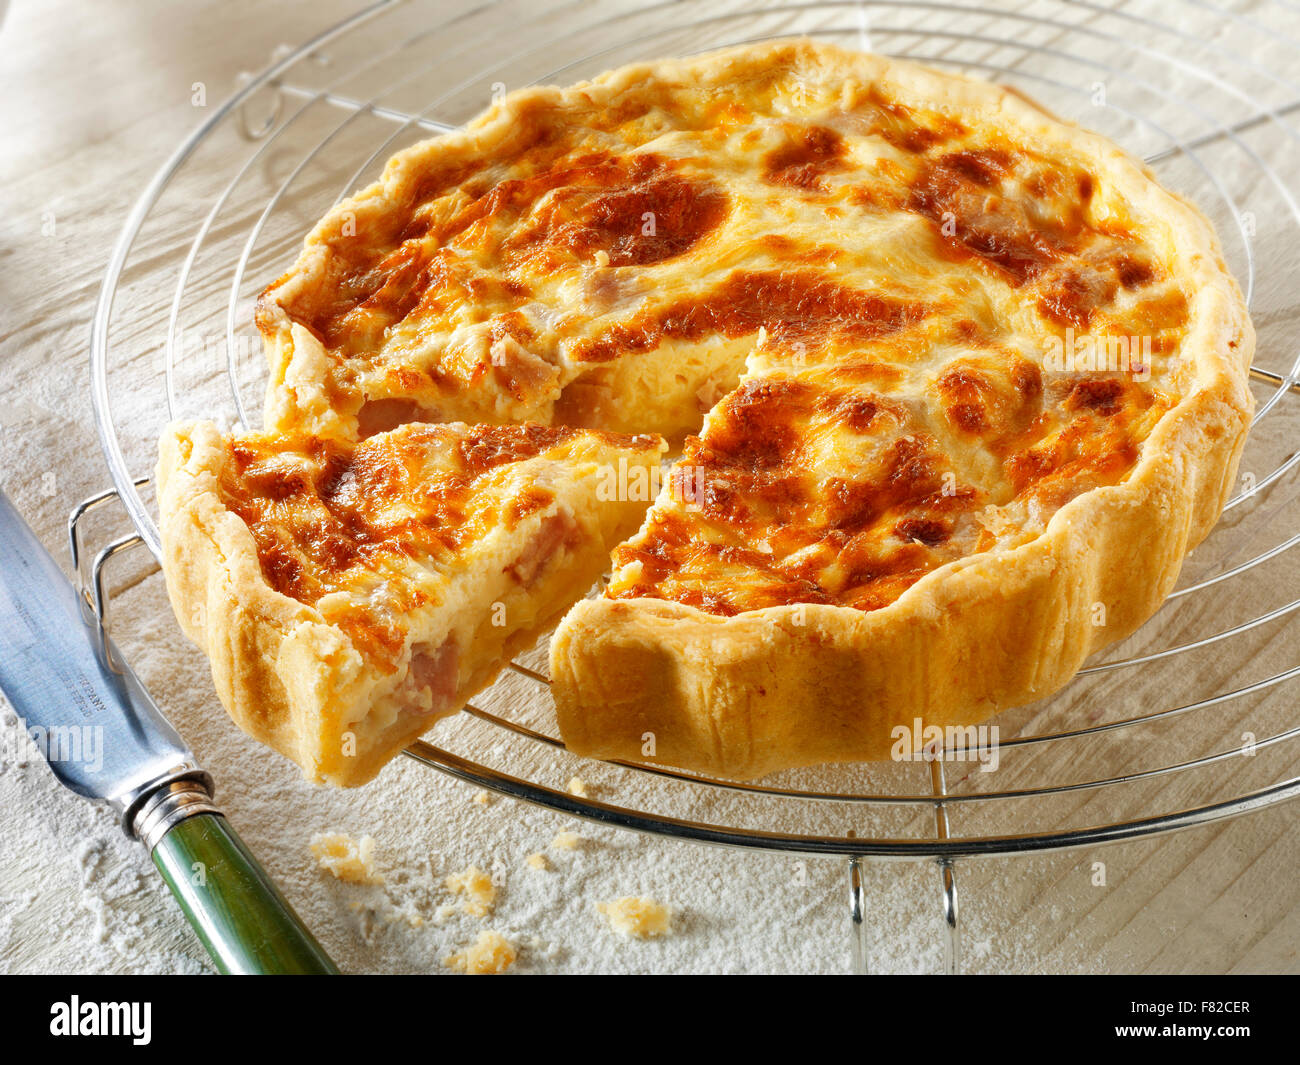 Cooked traditional French Quiche Lorraine with a cut slice Stock Photo